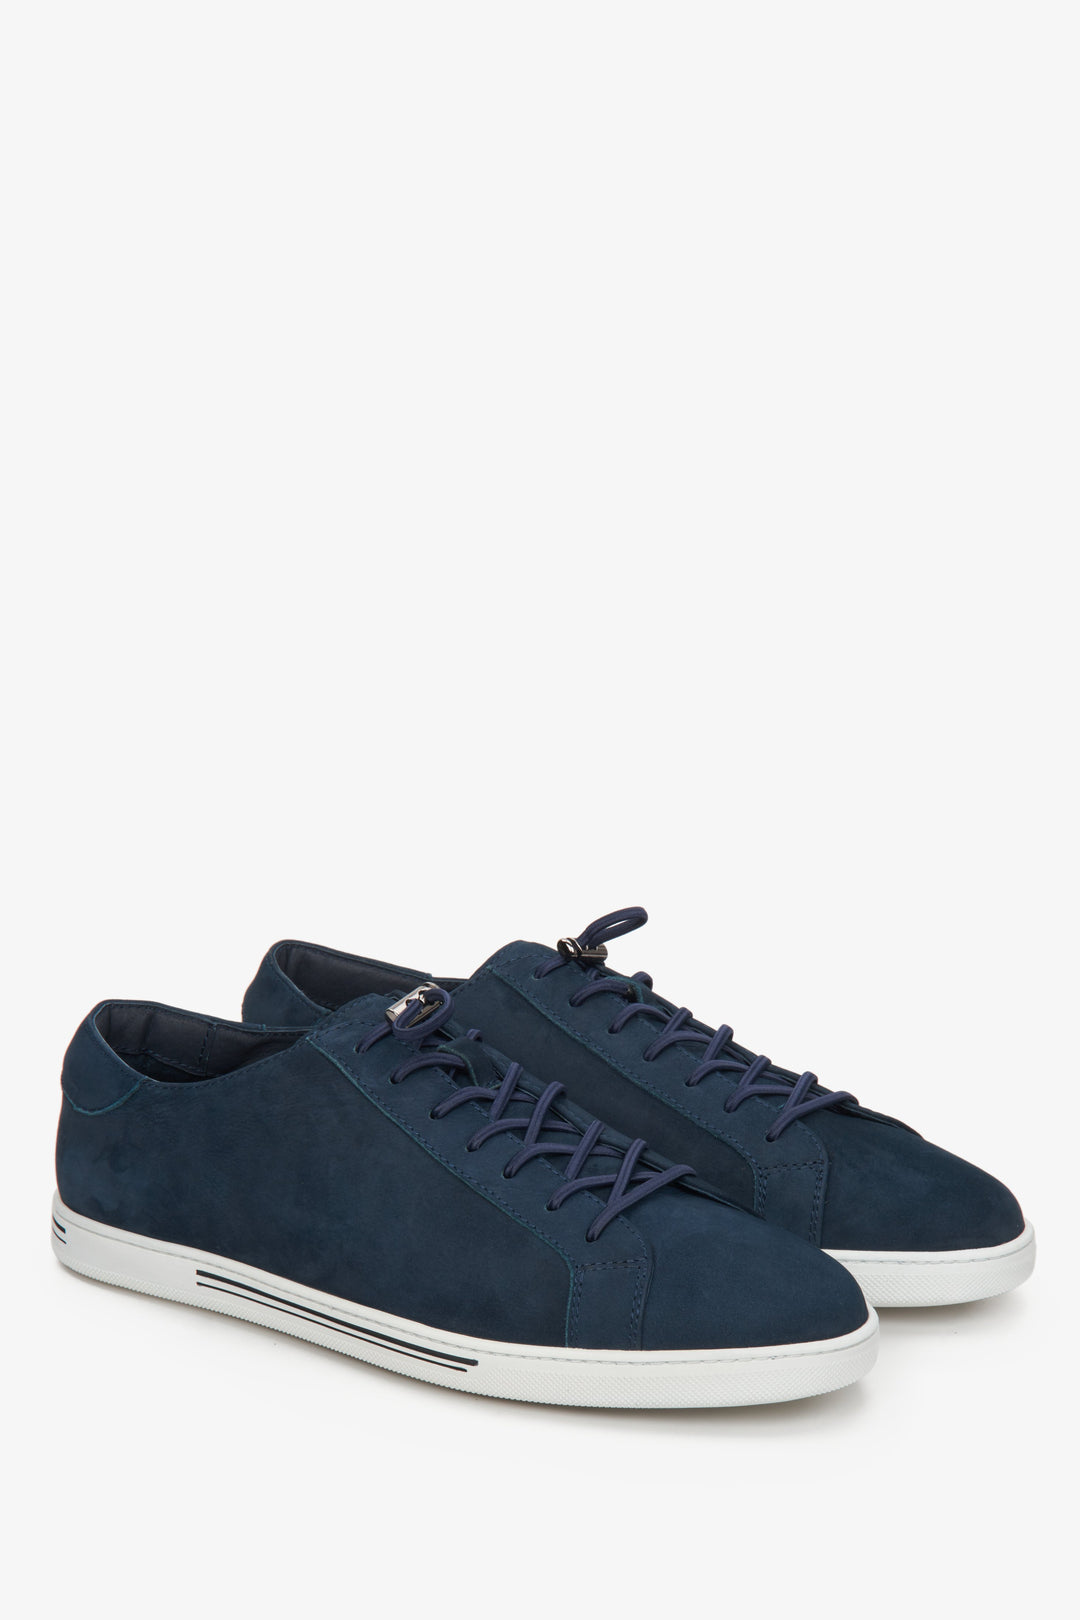 Estro brand navy blue nubuck men's sneakers - presentation of the toe and side seam of the footwear.